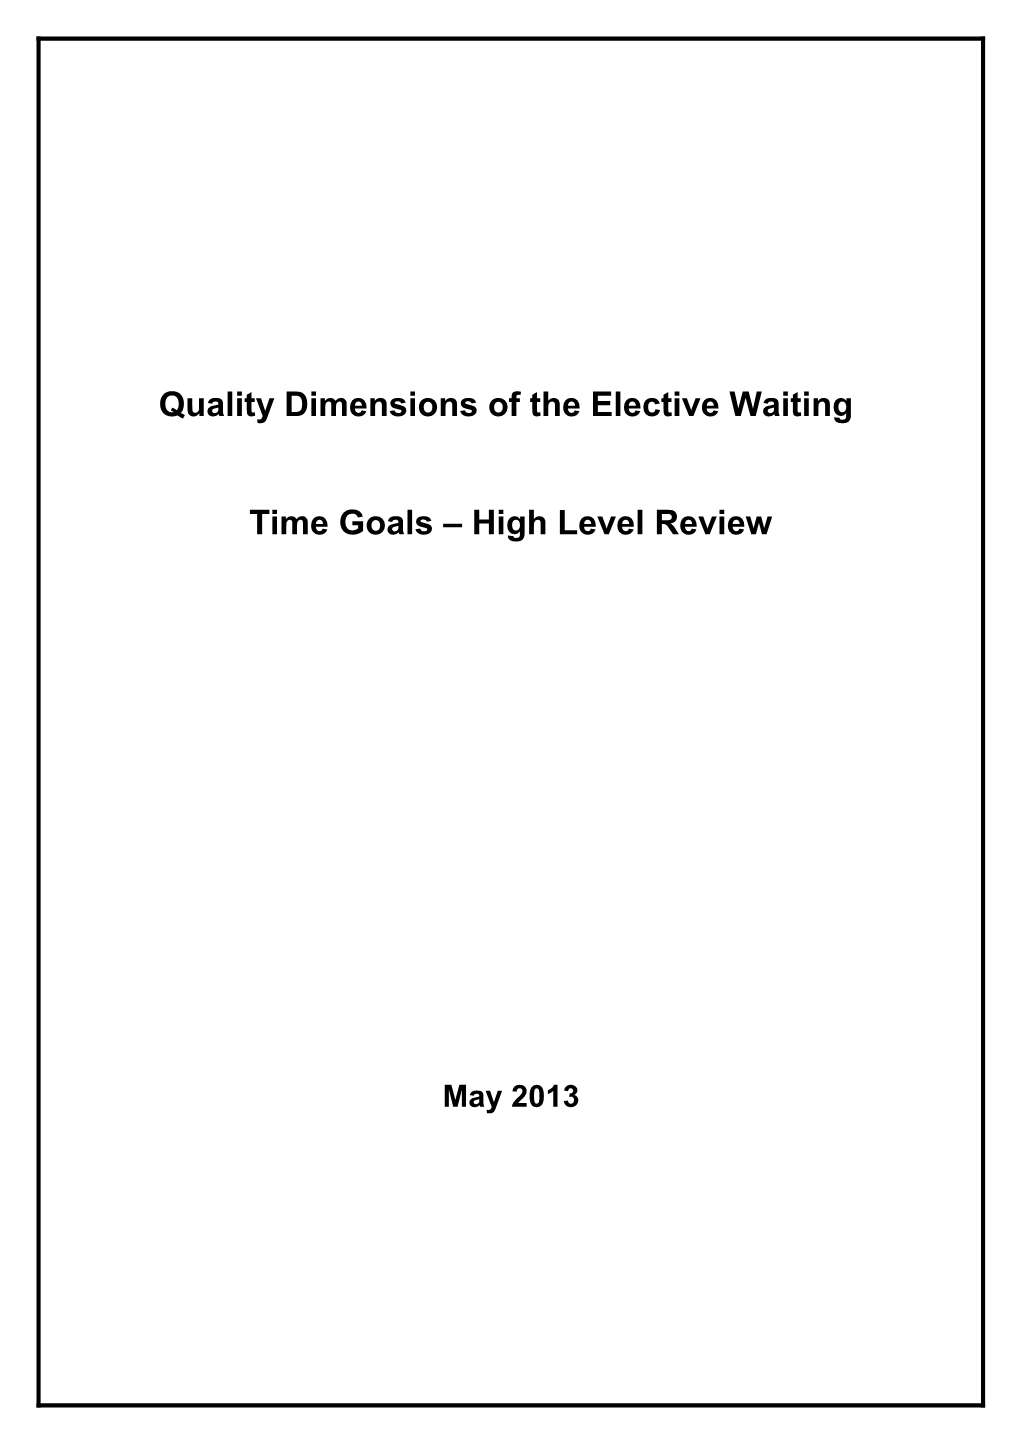 Quality Dimensions of the Elective Waiting Time Goals High Level Review